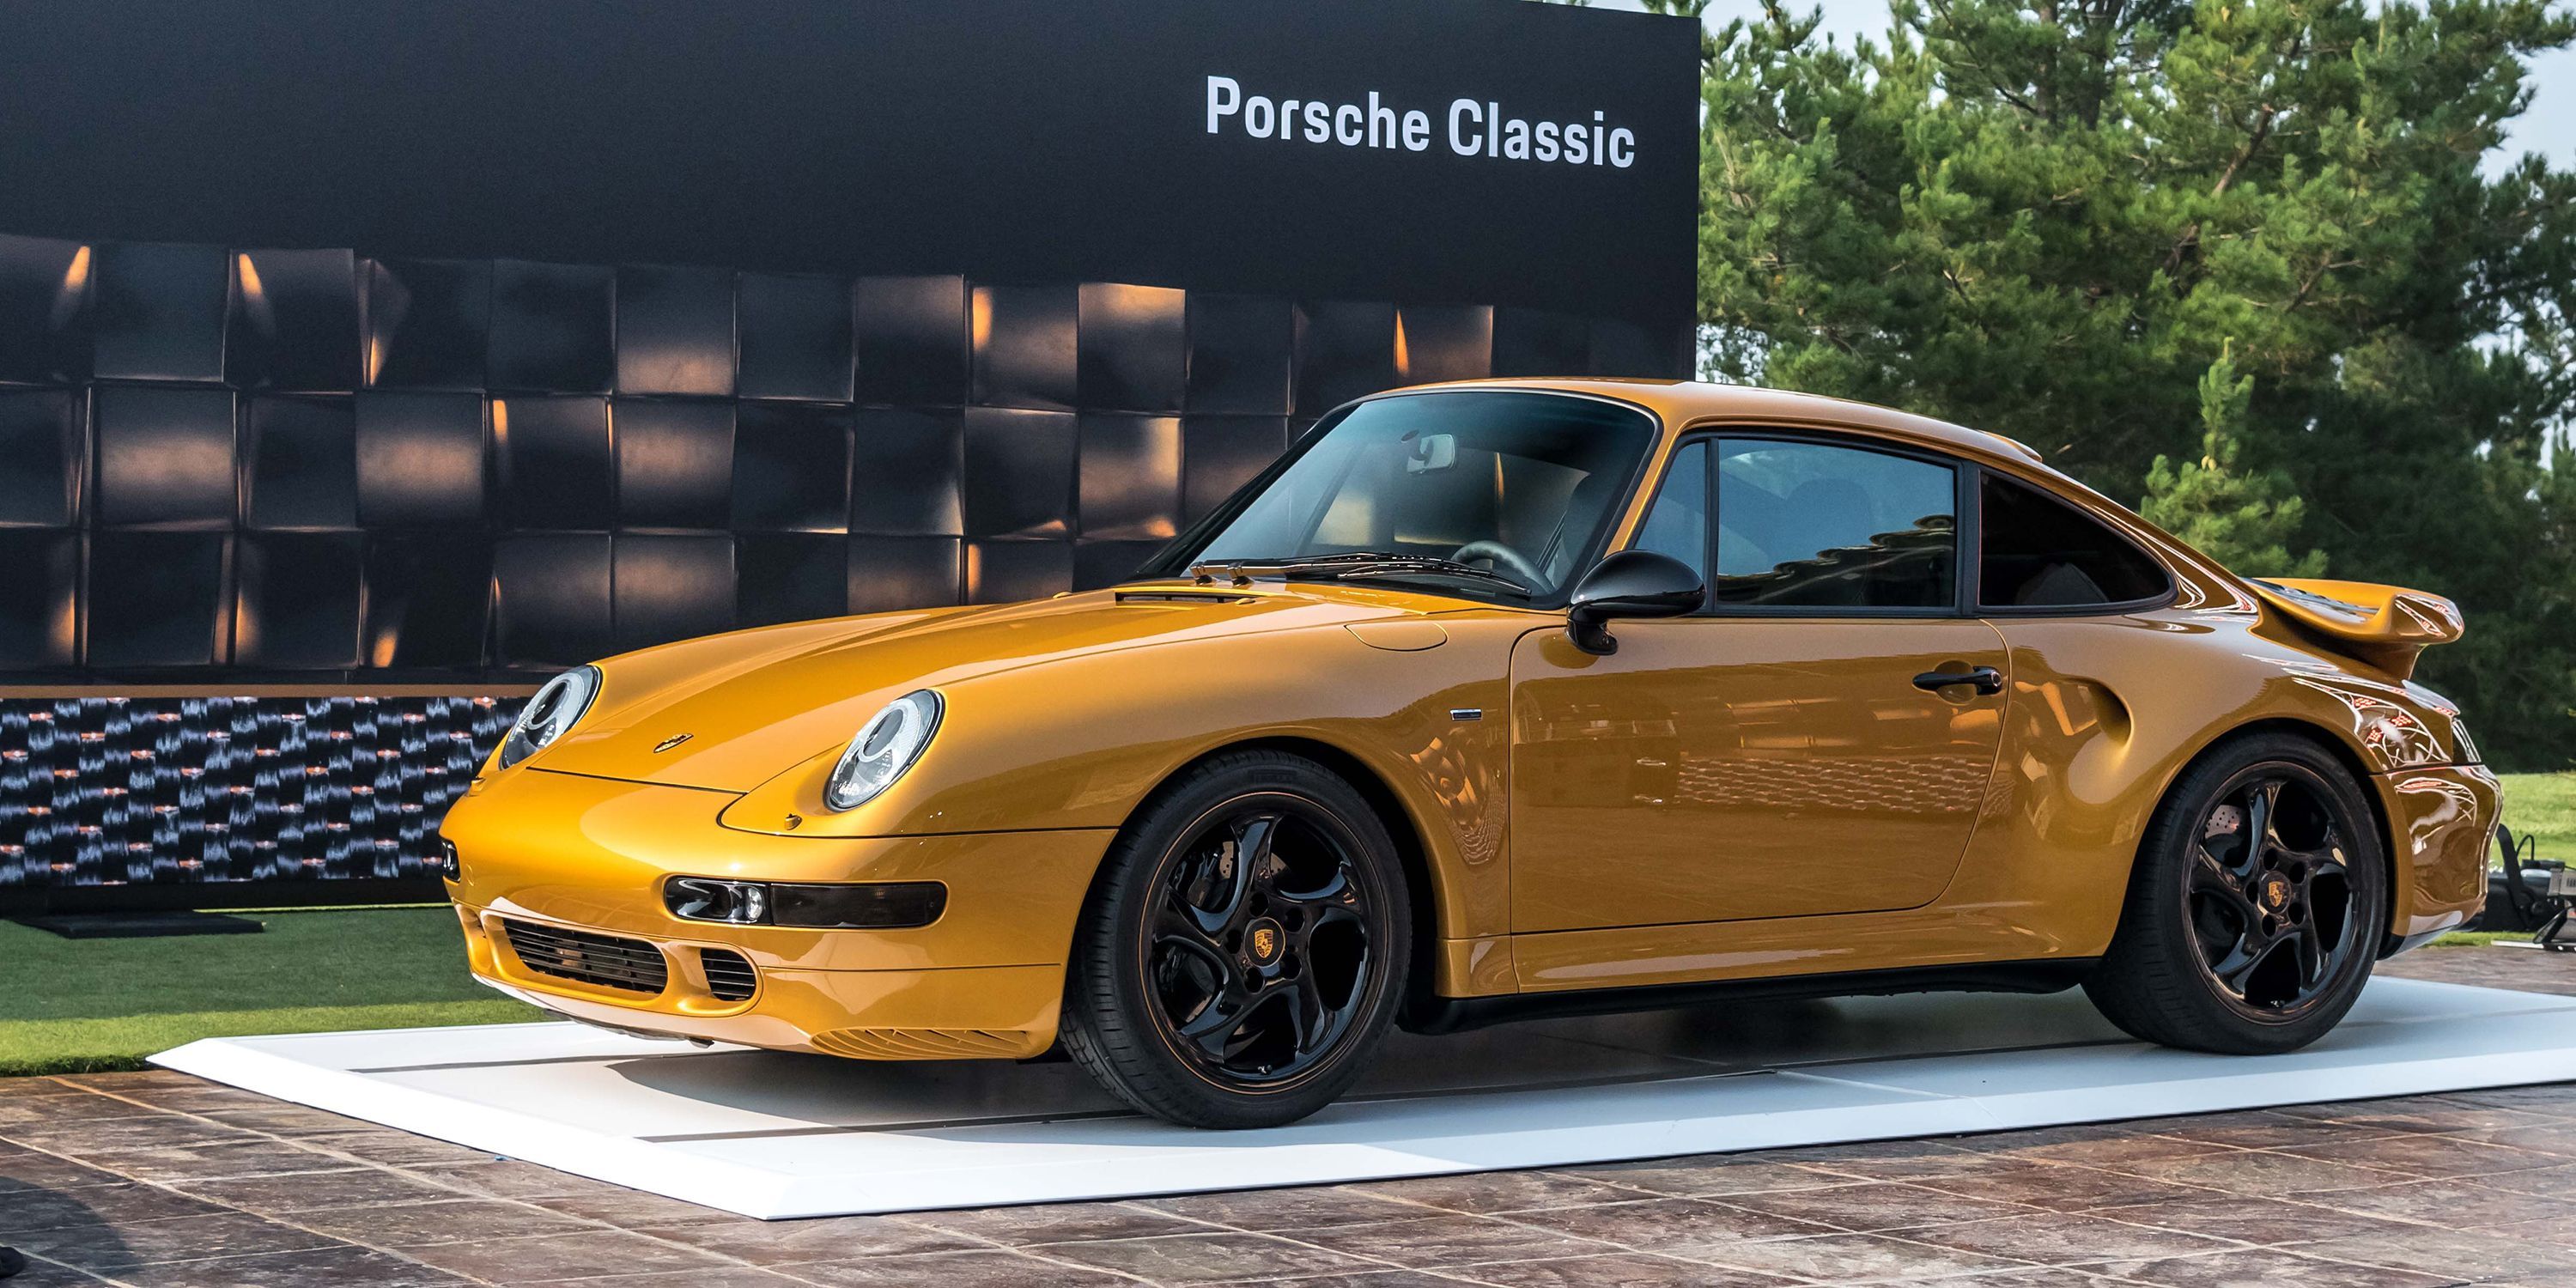 Porsche 993: The iconic sports car built for all generations.